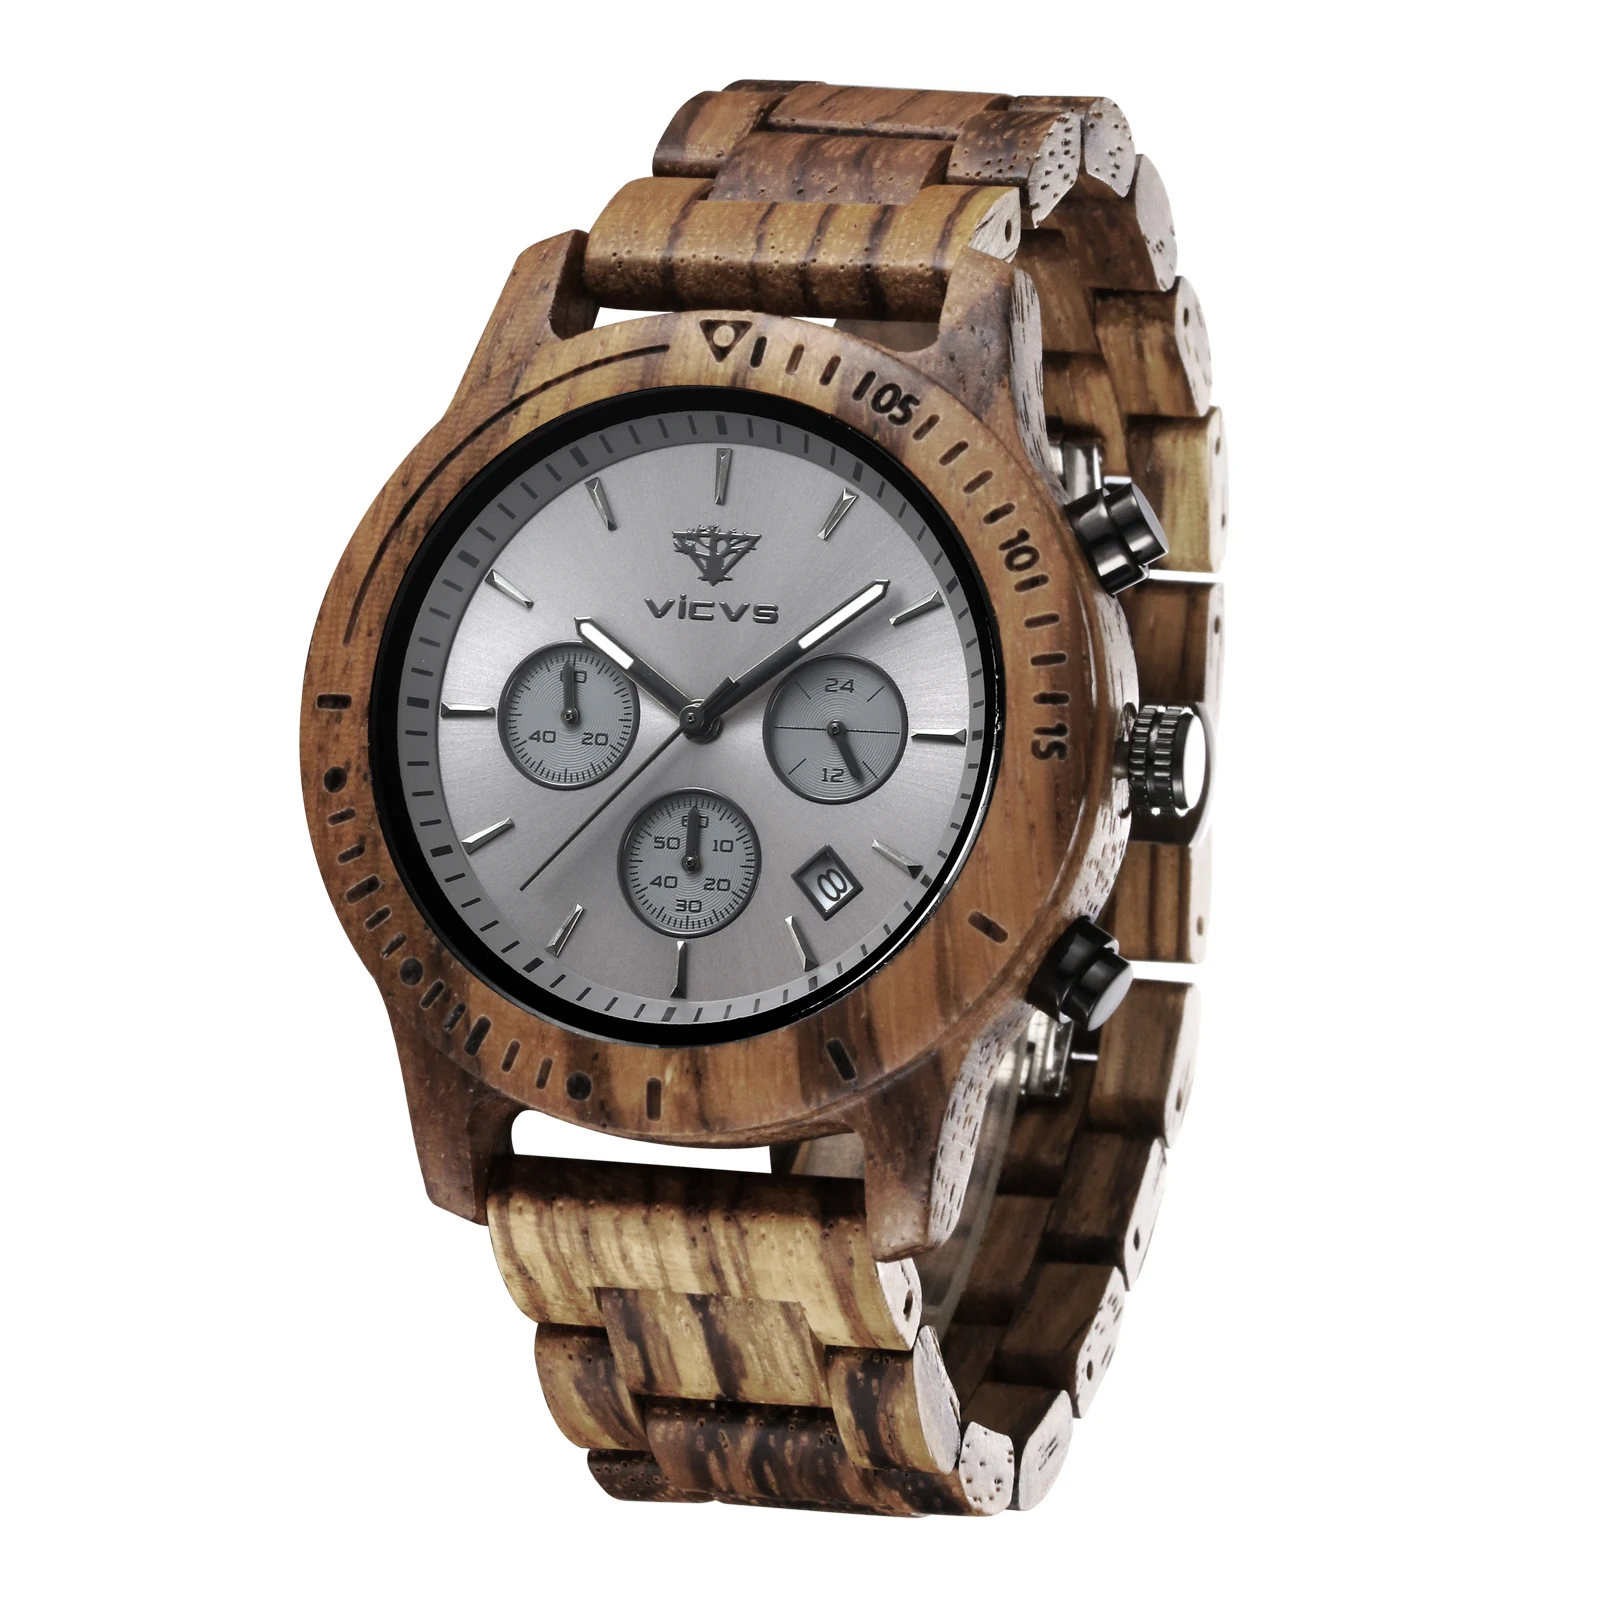 

Vicvs Men's Watch Wooden Watch Date Display Casual Mens Luxury Wooden Chronograph Sports Military Quartz Watch Wooden Gift